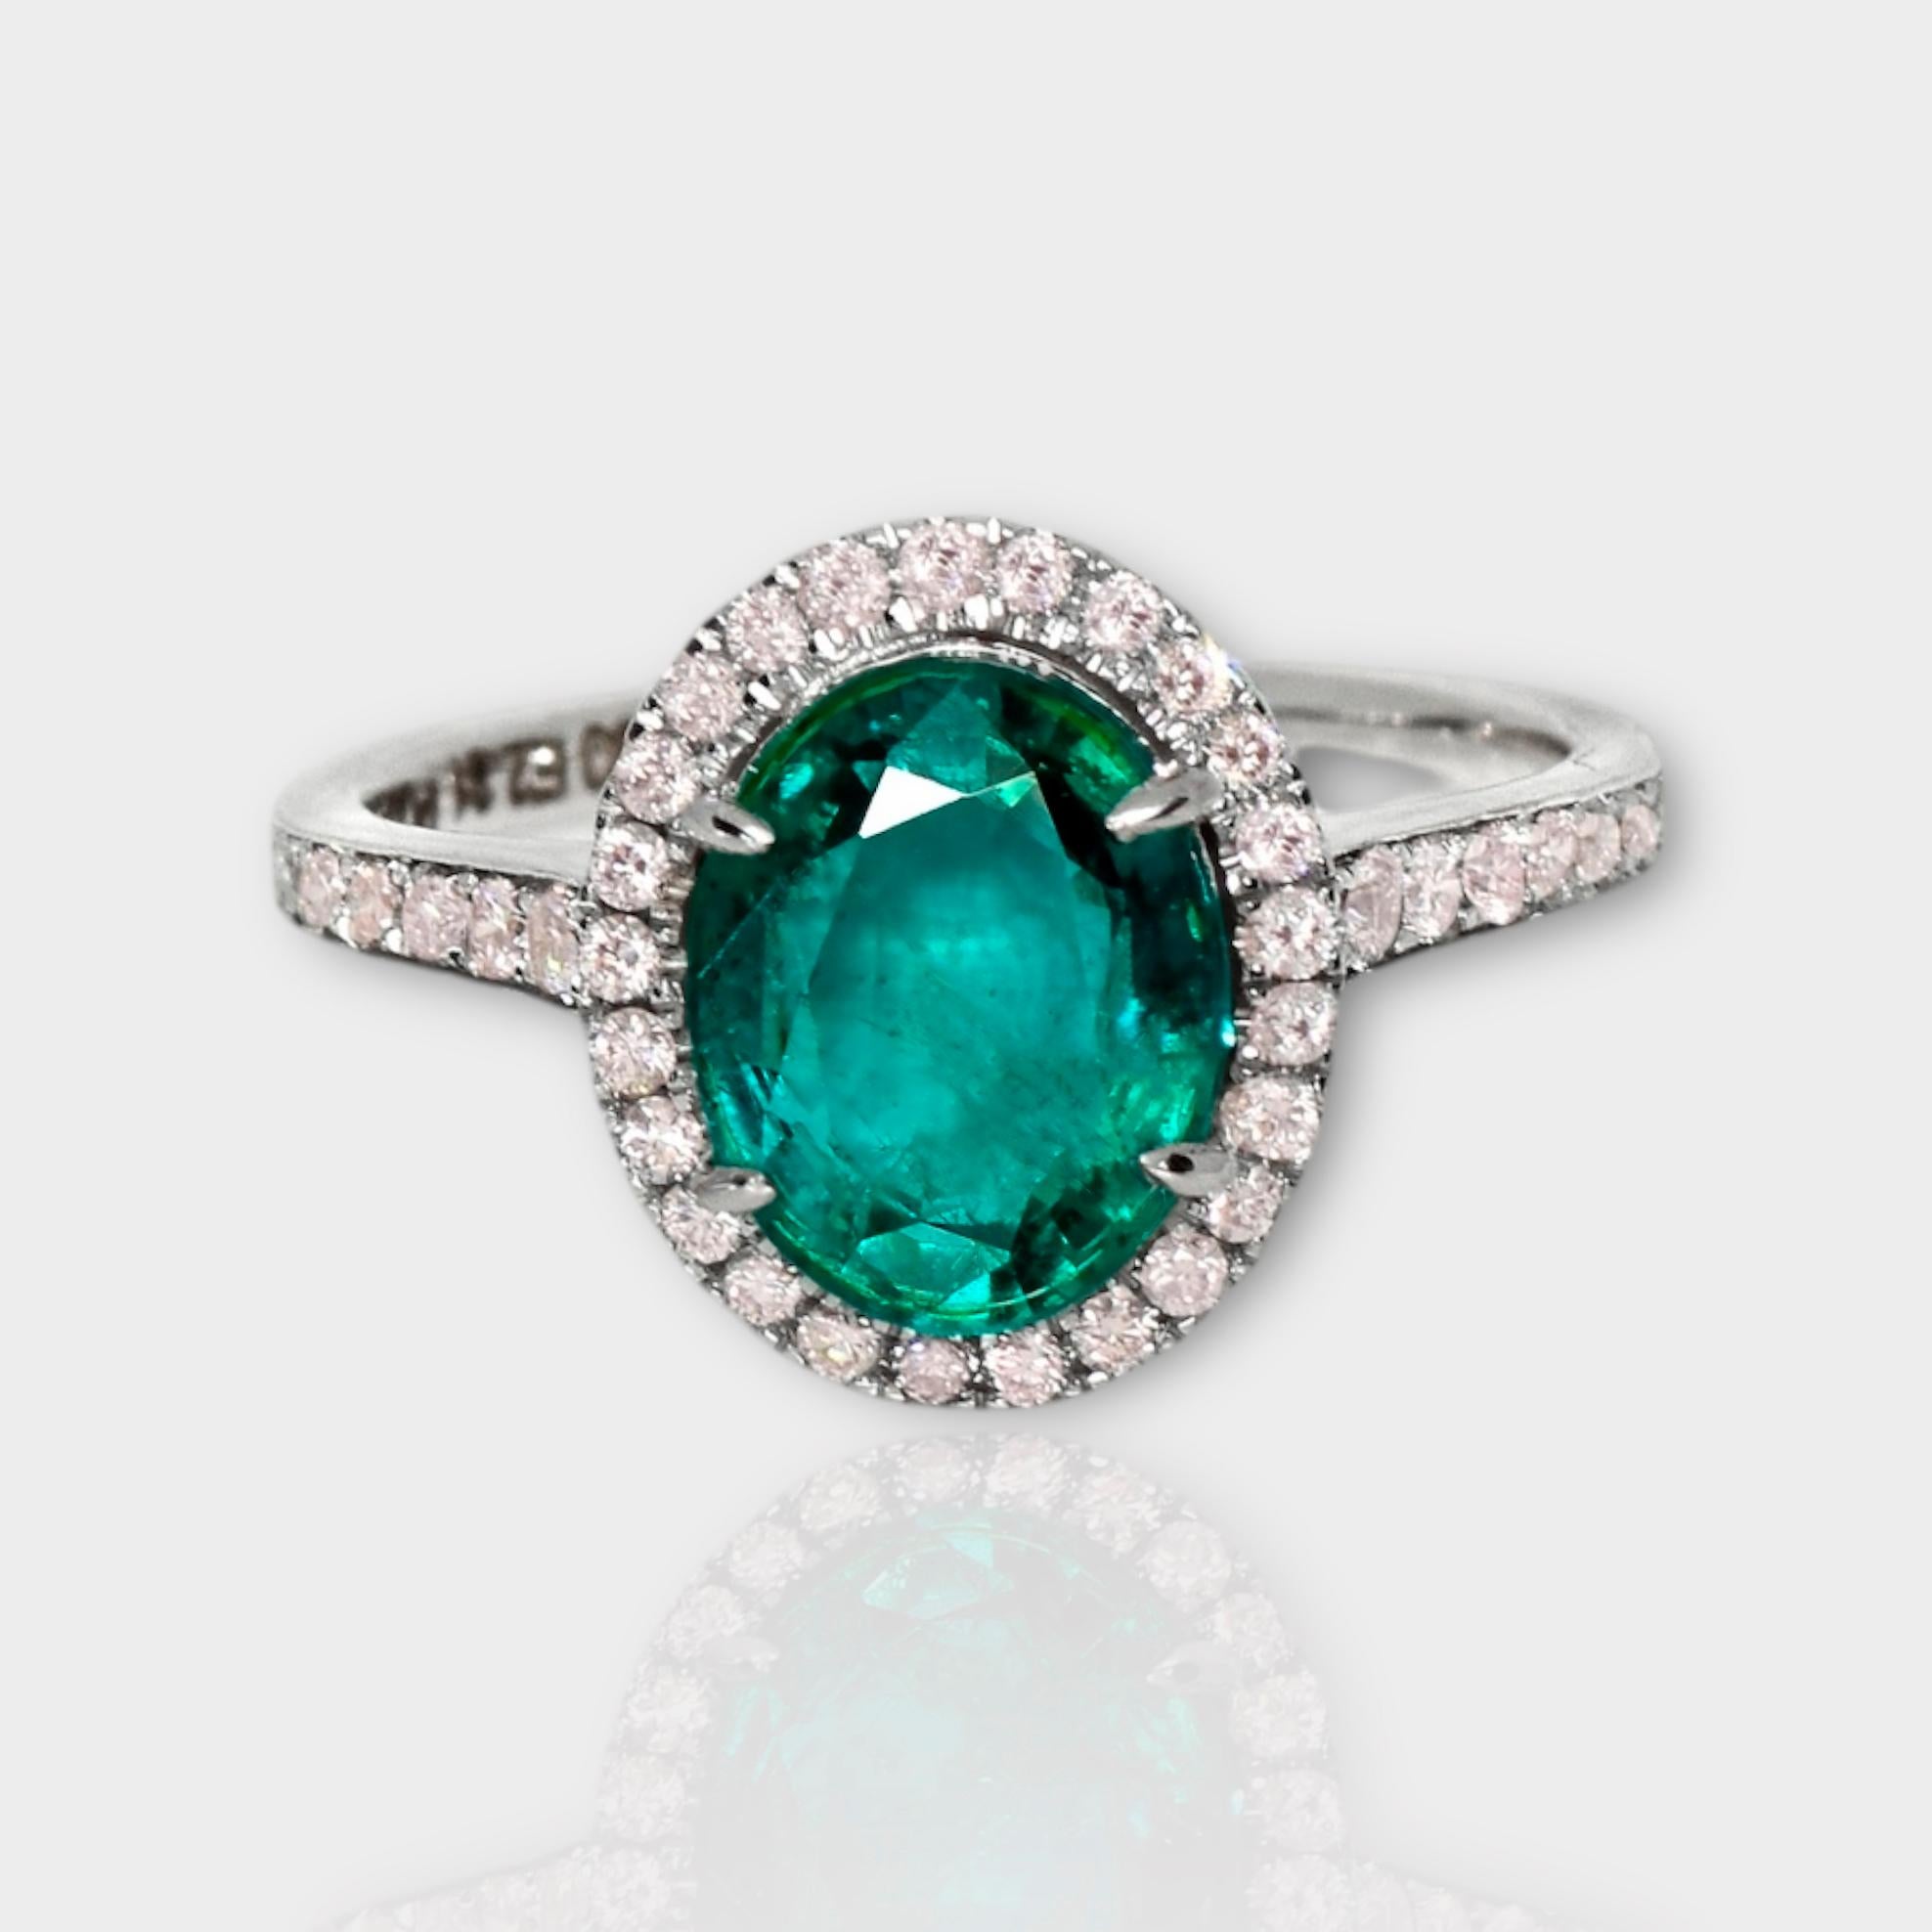 **IGI 18K White Gold 2.31 ct Emerald&Pink Diamonds Antique Art Deco Style Engagement Ring** 

An IGI-certified natural Zambia green emerald weighing 2.31 ct is set on an 18K white gold arc deco design band with natural pink diamonds weighing 0.42